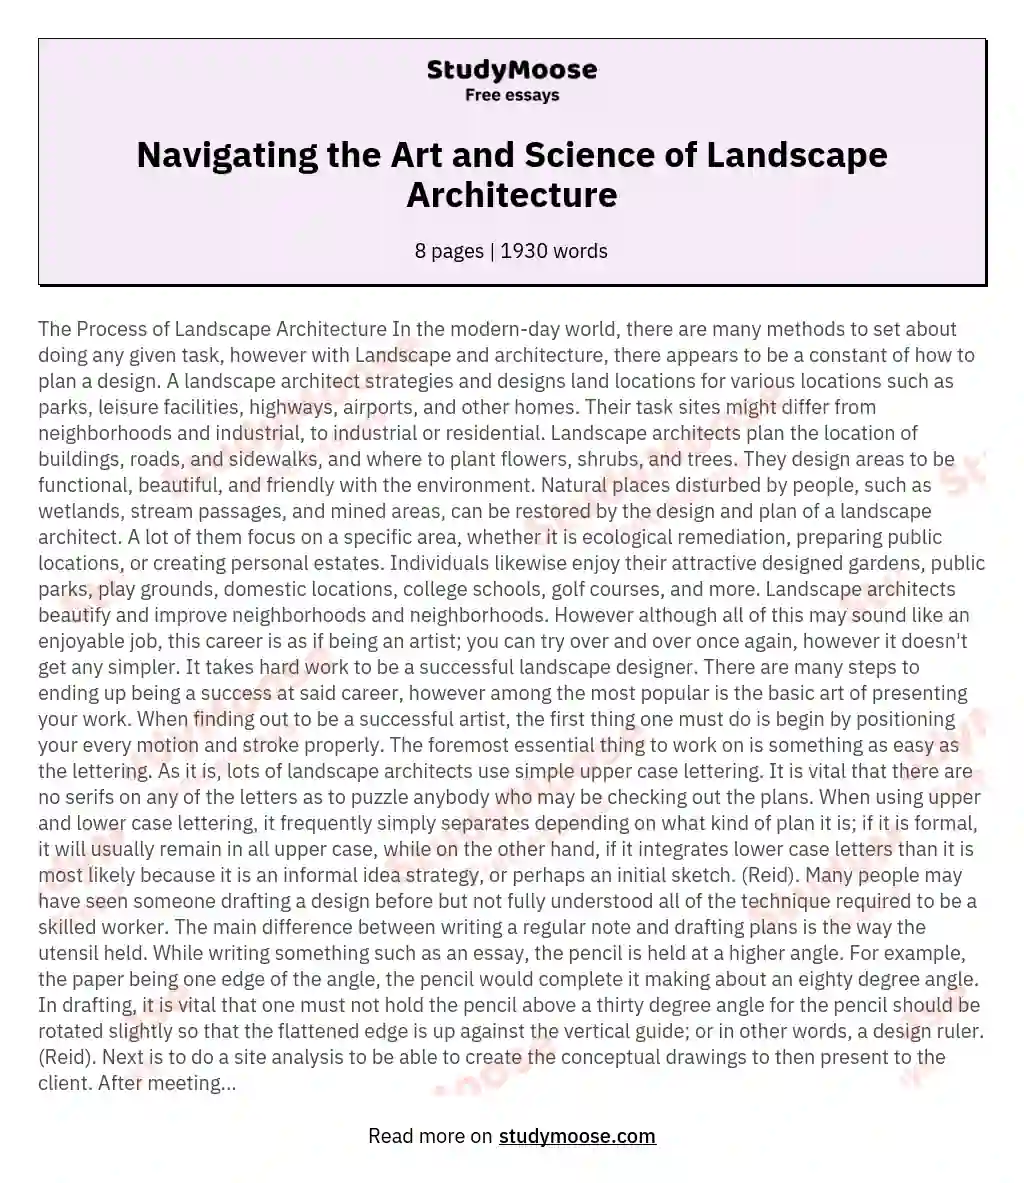 Navigating the Art and Science of Landscape Architecture essay